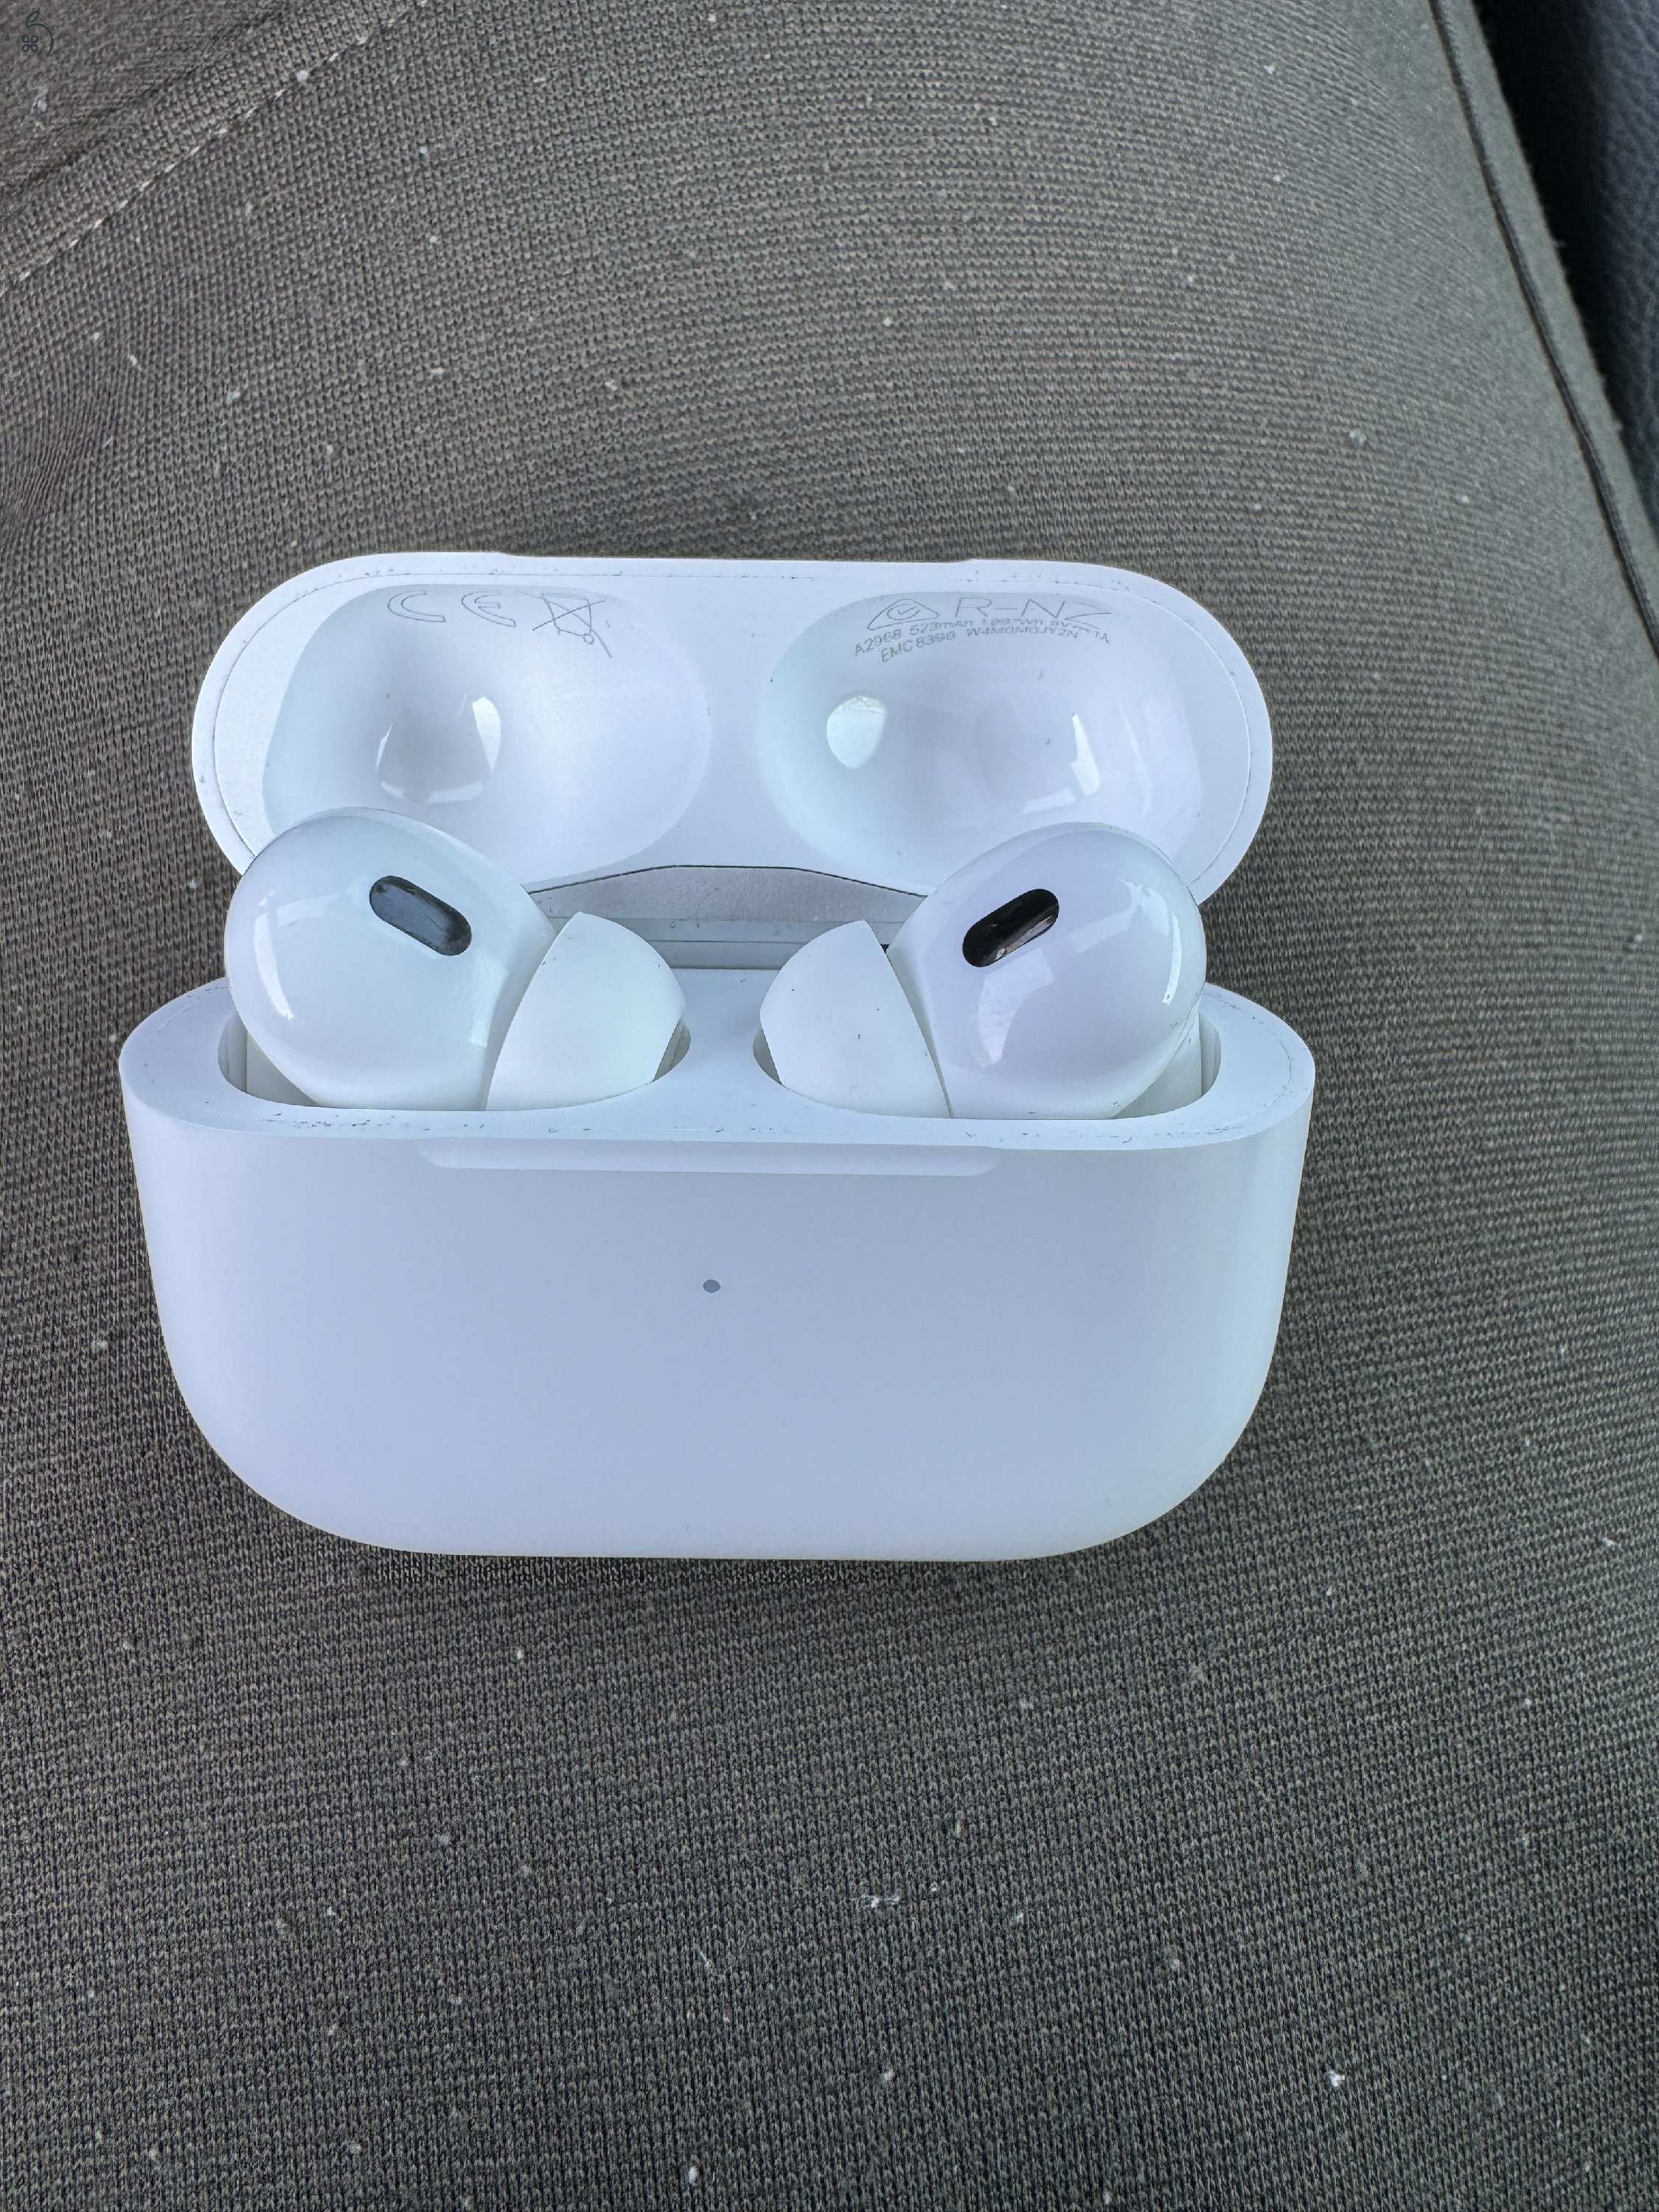 Airpods Pro 2 Magsafe